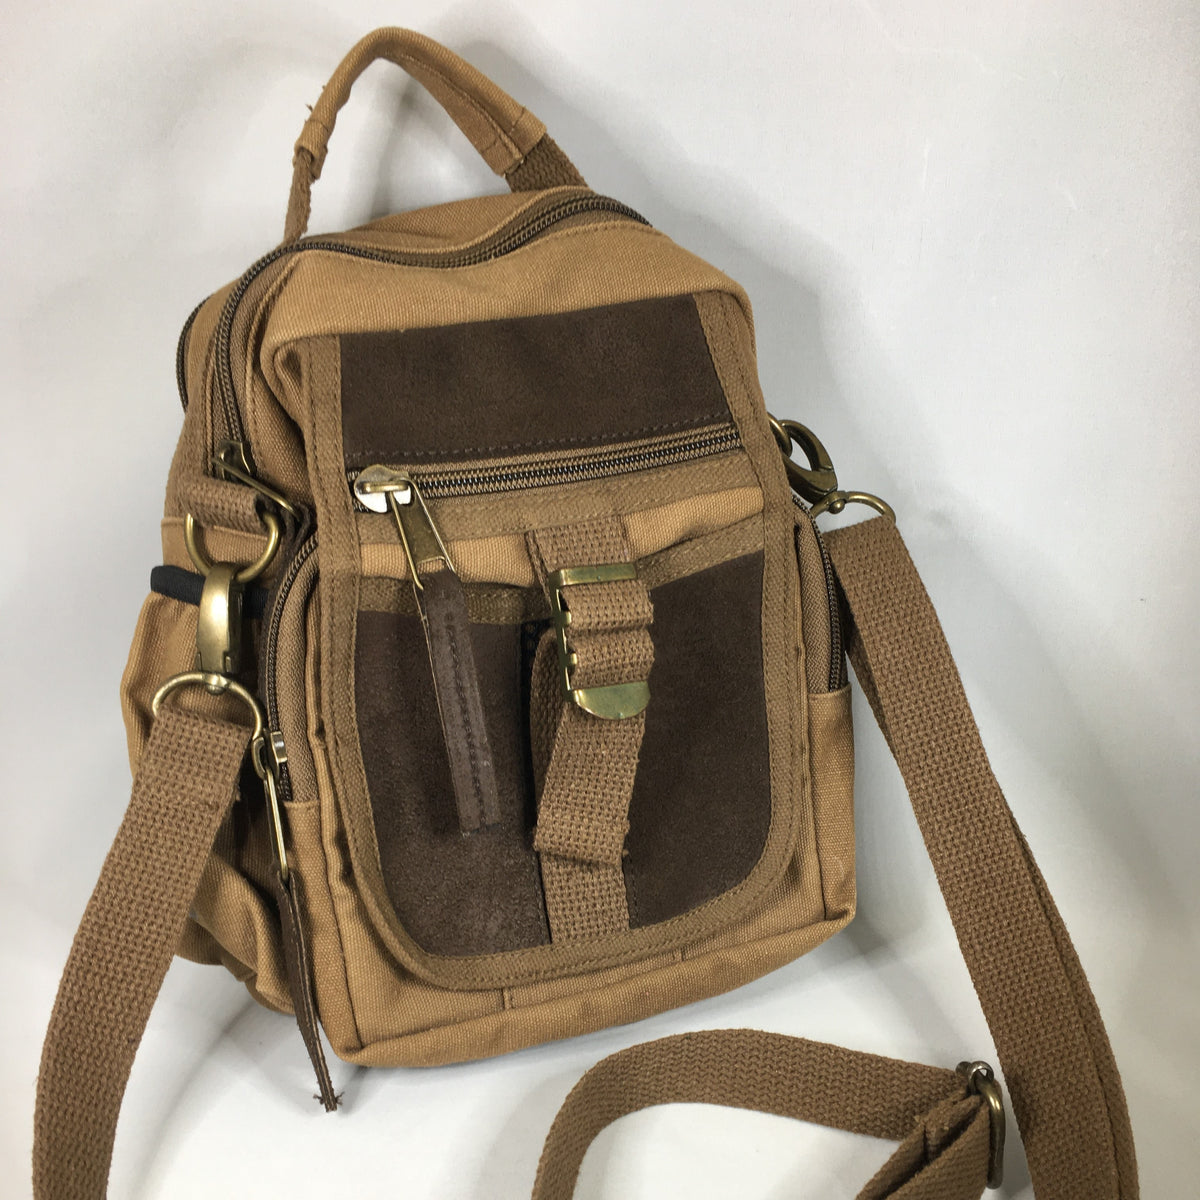 Canvas and Leather Travel Bag - Brown